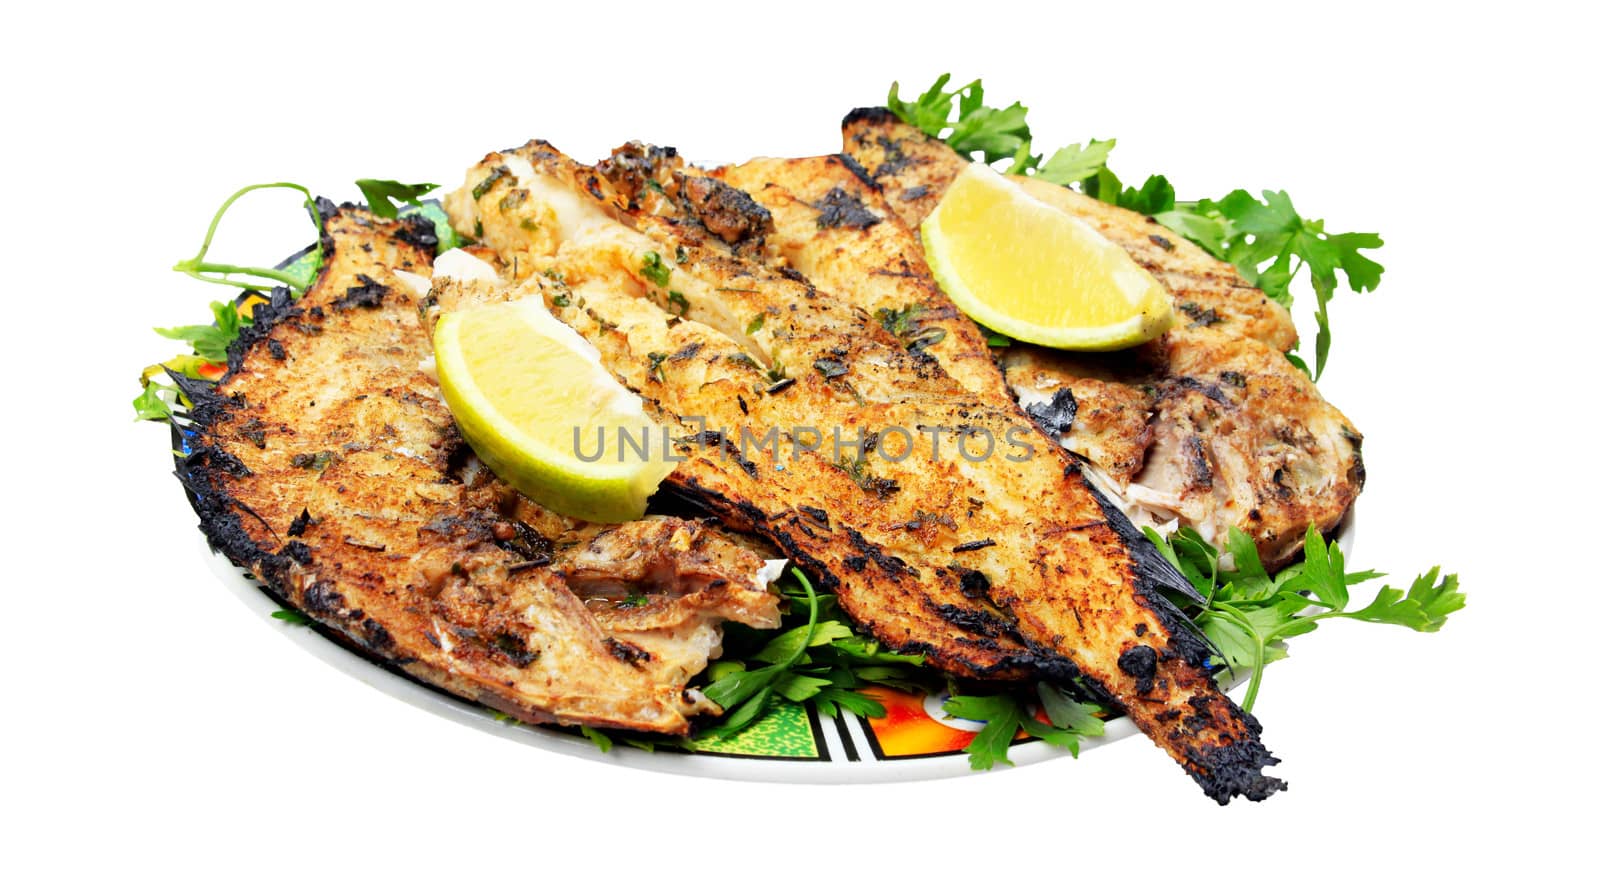 Grilled fish with greens on the plate - isolated obn white background